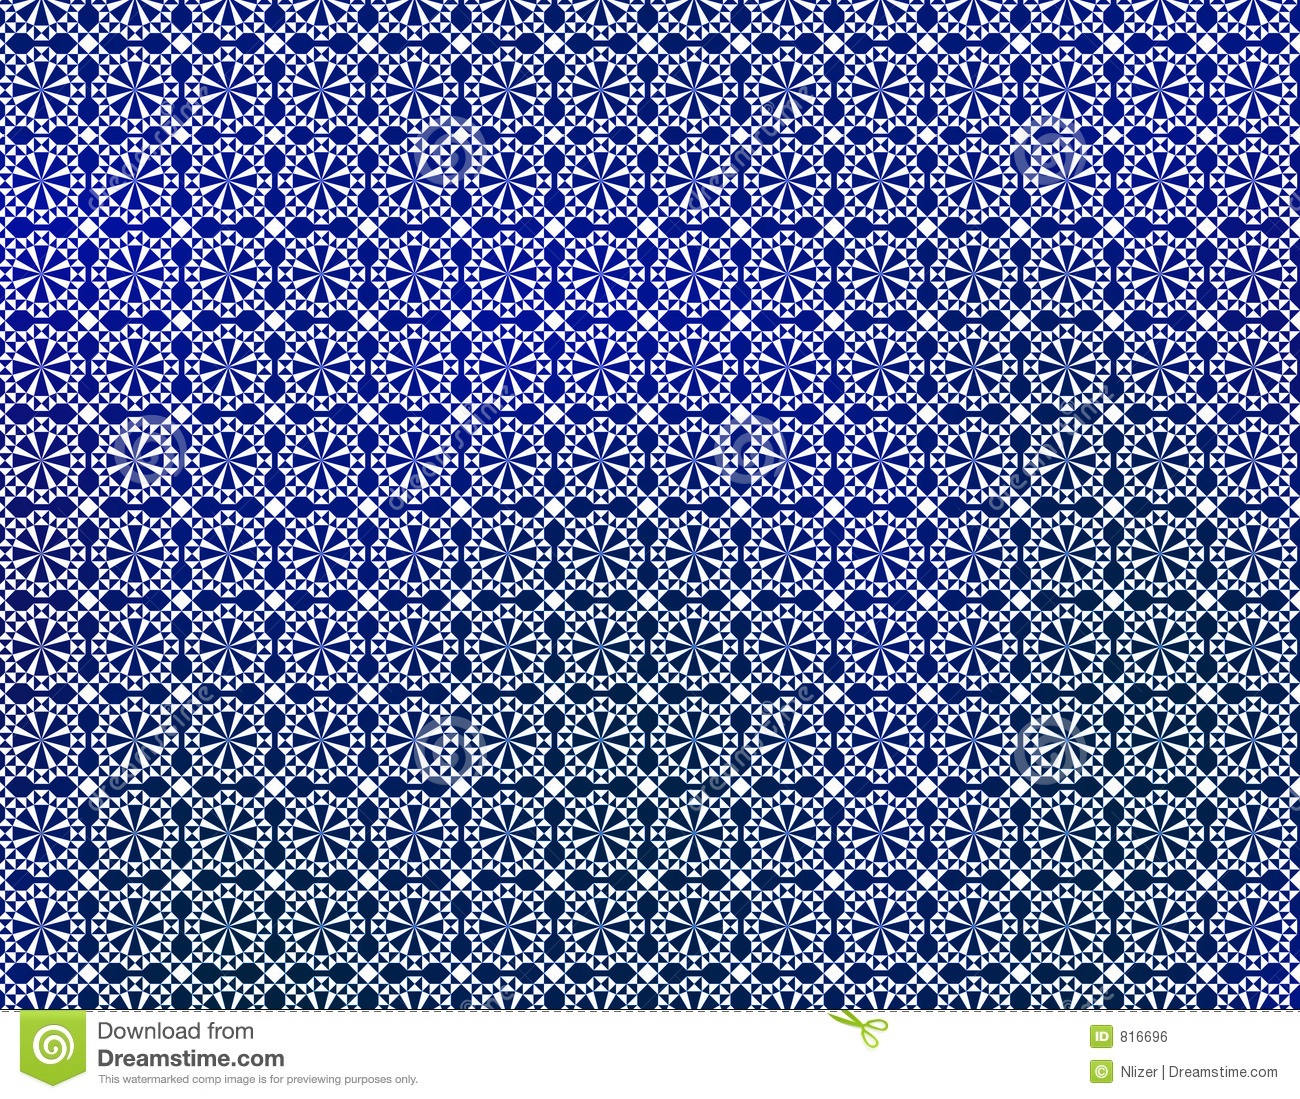 Navy Blue And White Background Geometric